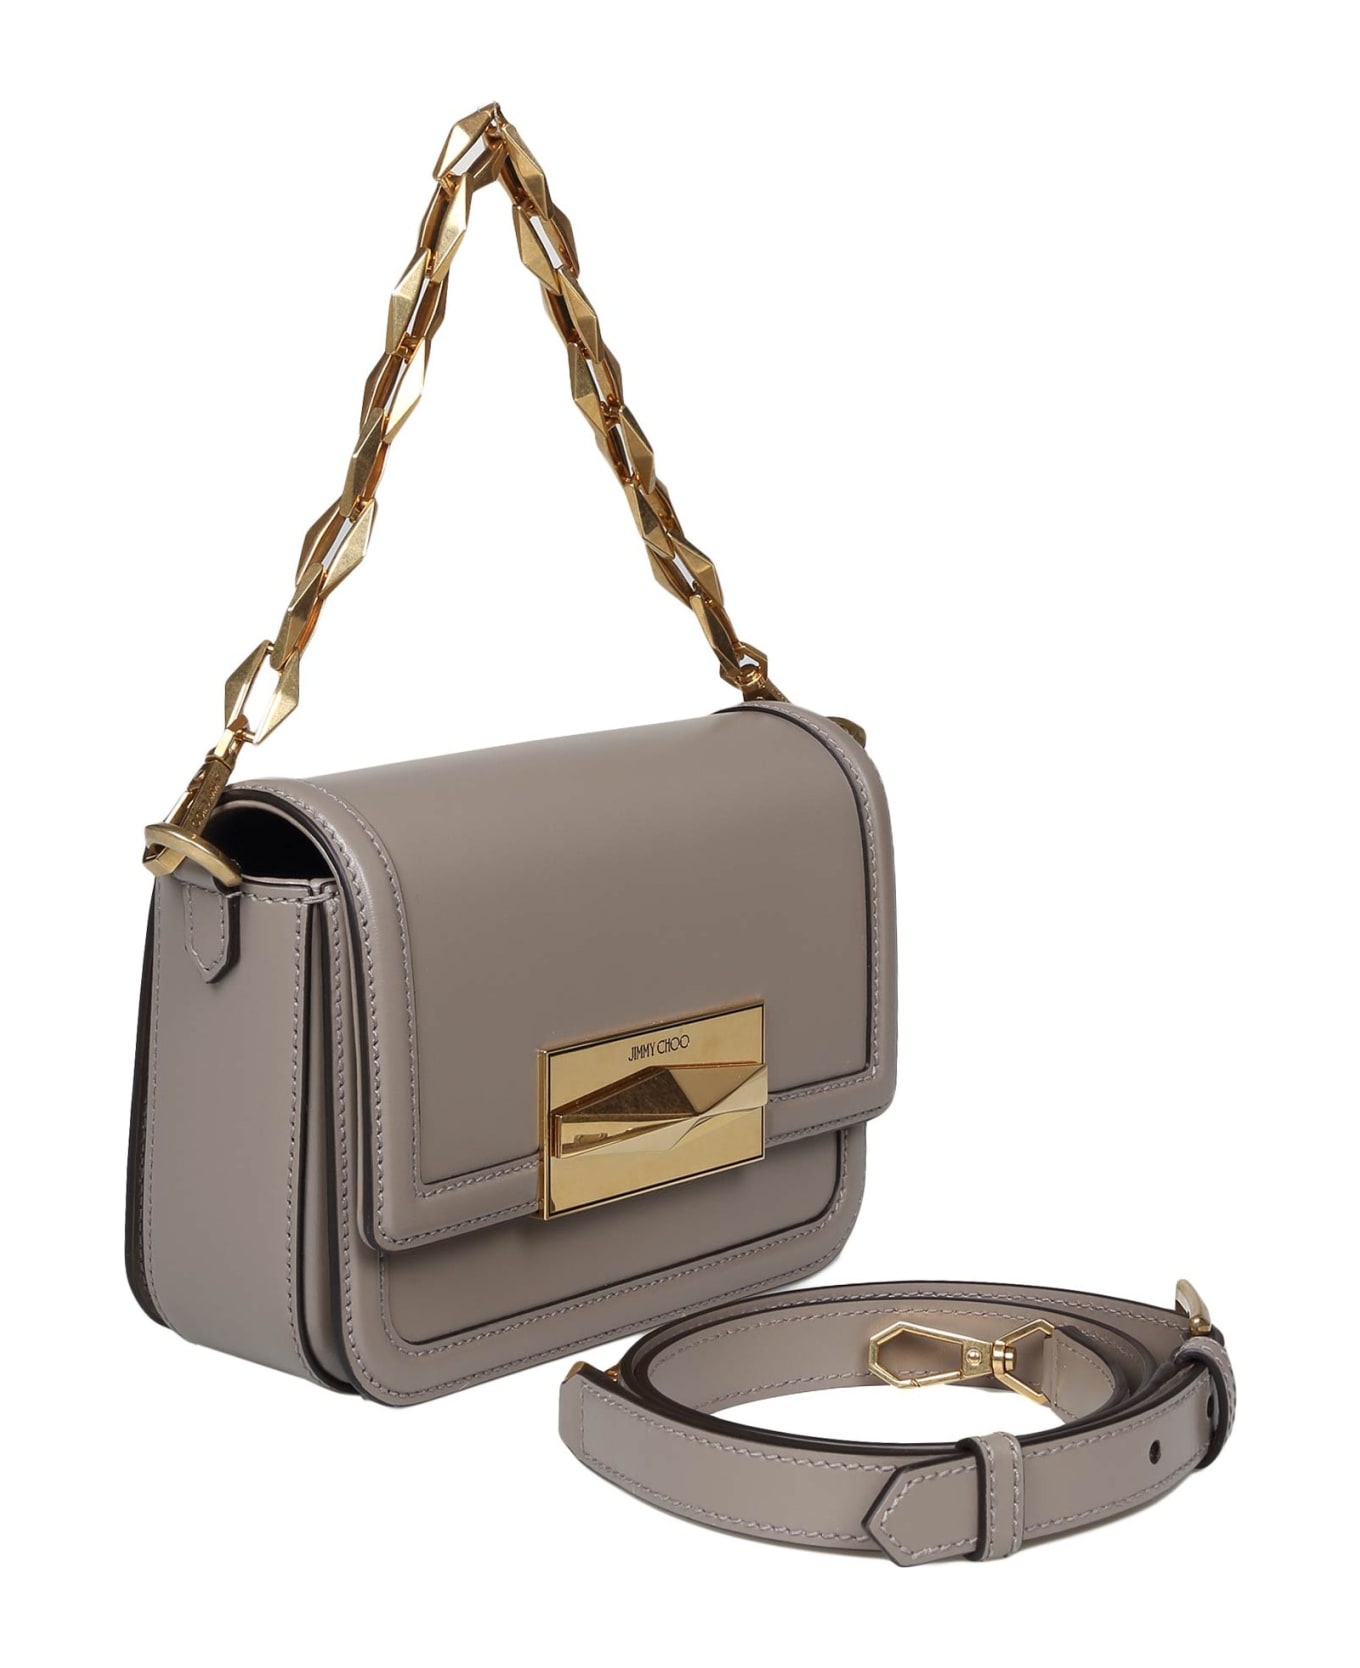 Jimmy Choo Diamond Crossbody Bag In Taupe Color Leather - Taupe